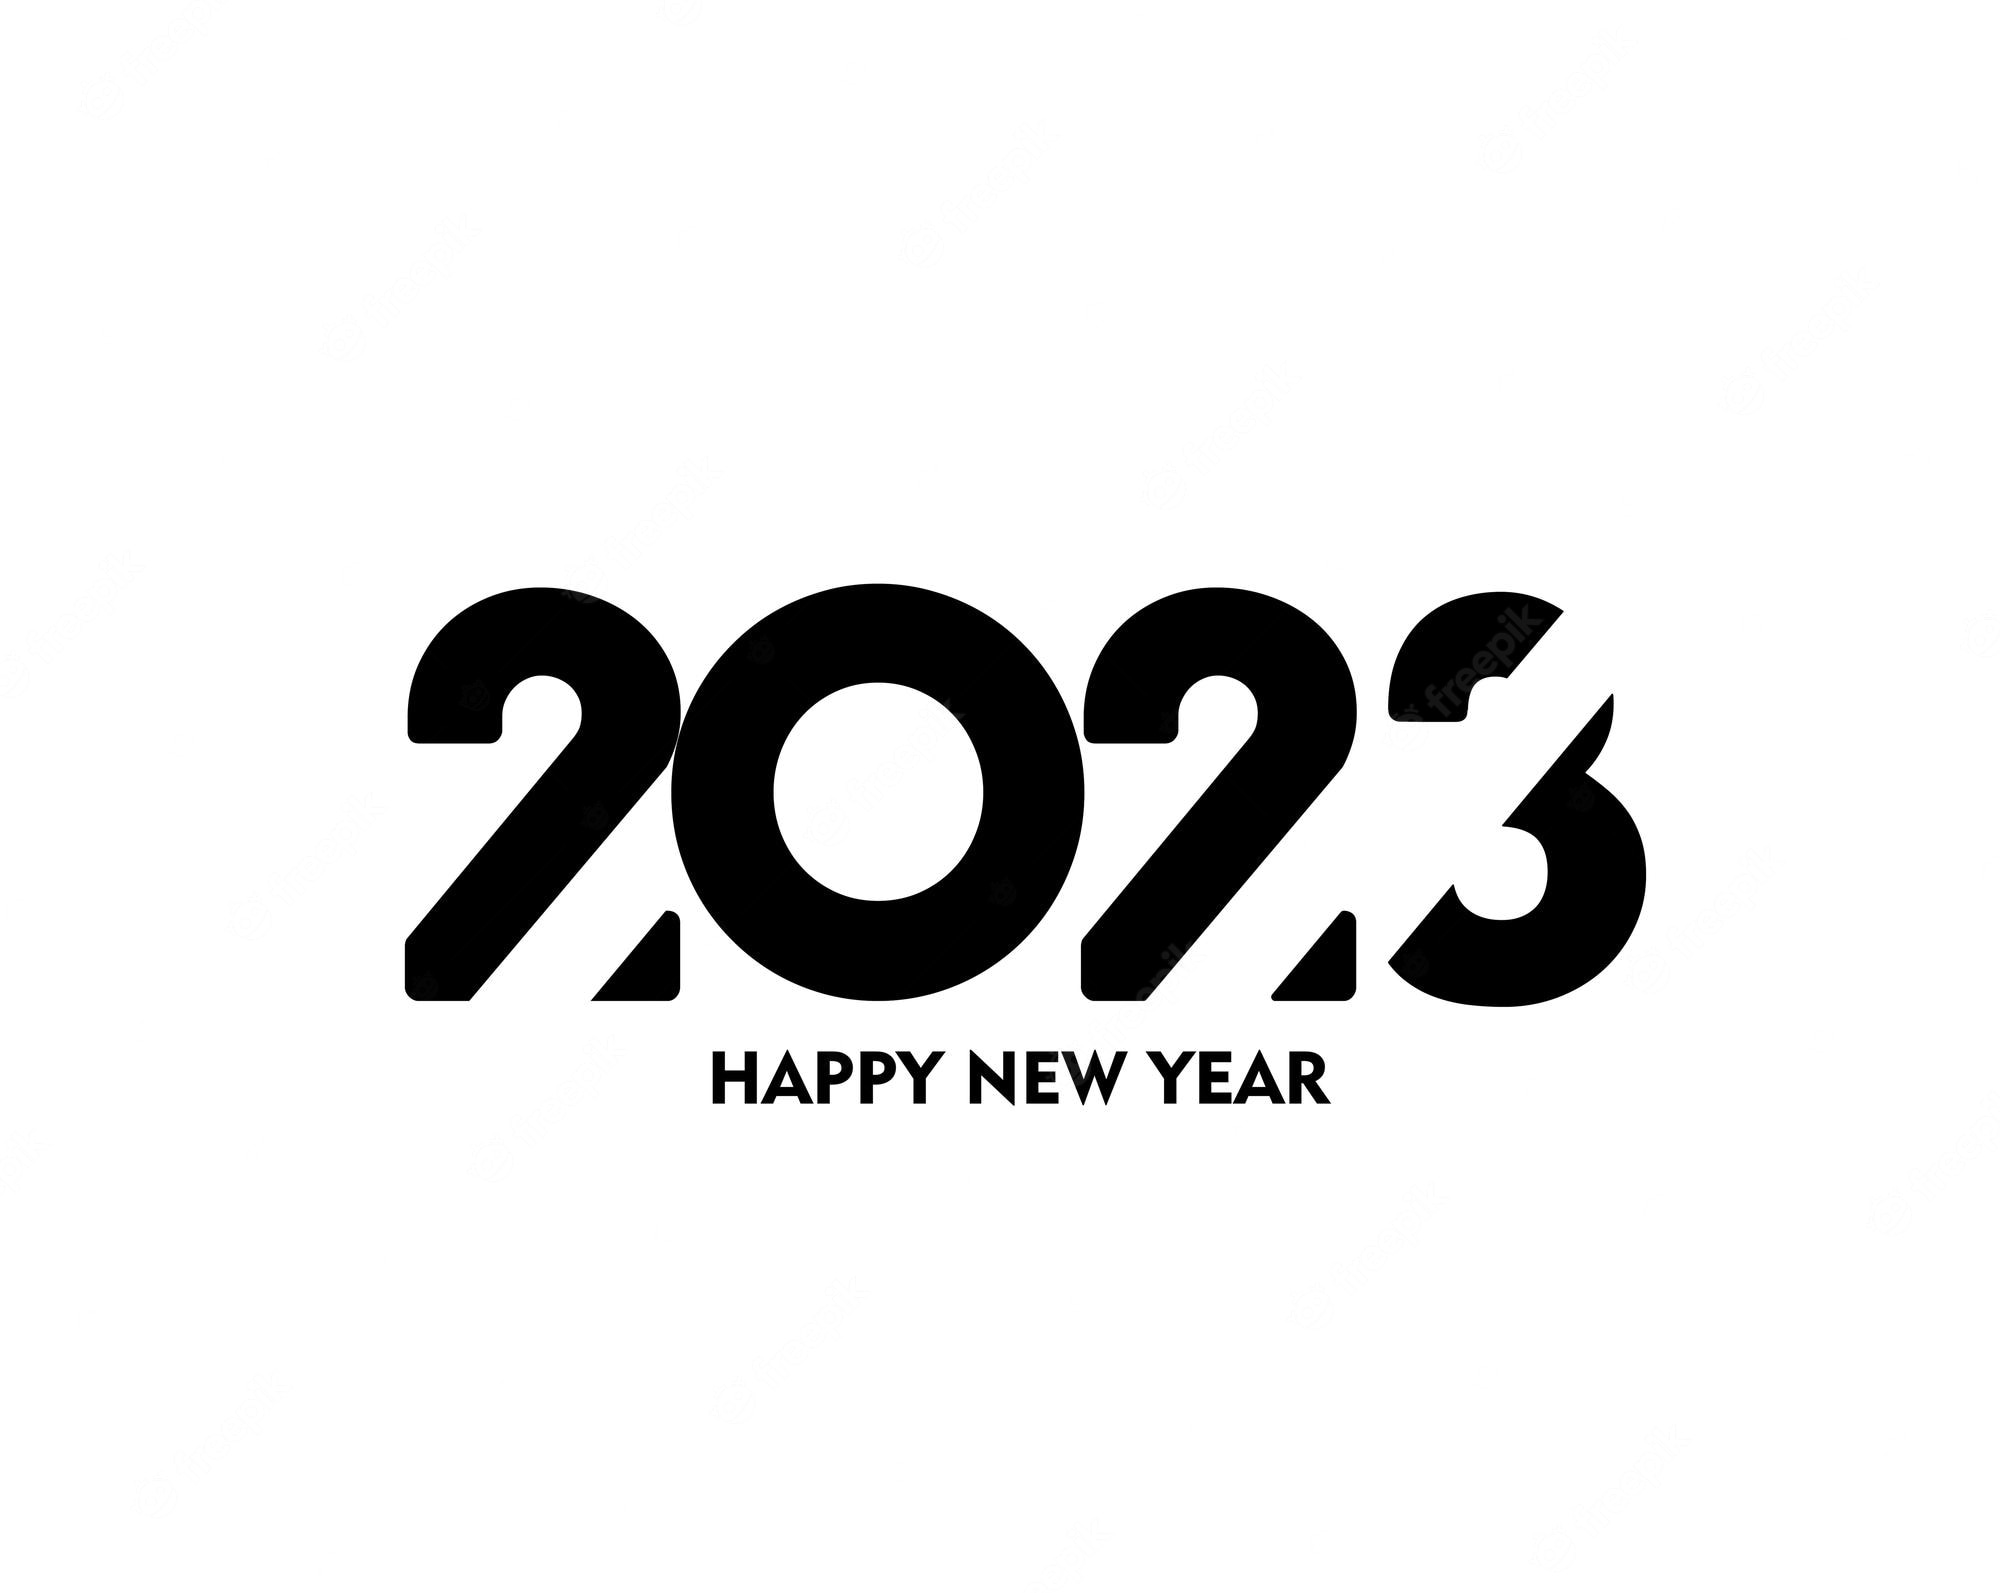 Happy new year 2023 Vectors & Illustrations for Free Download